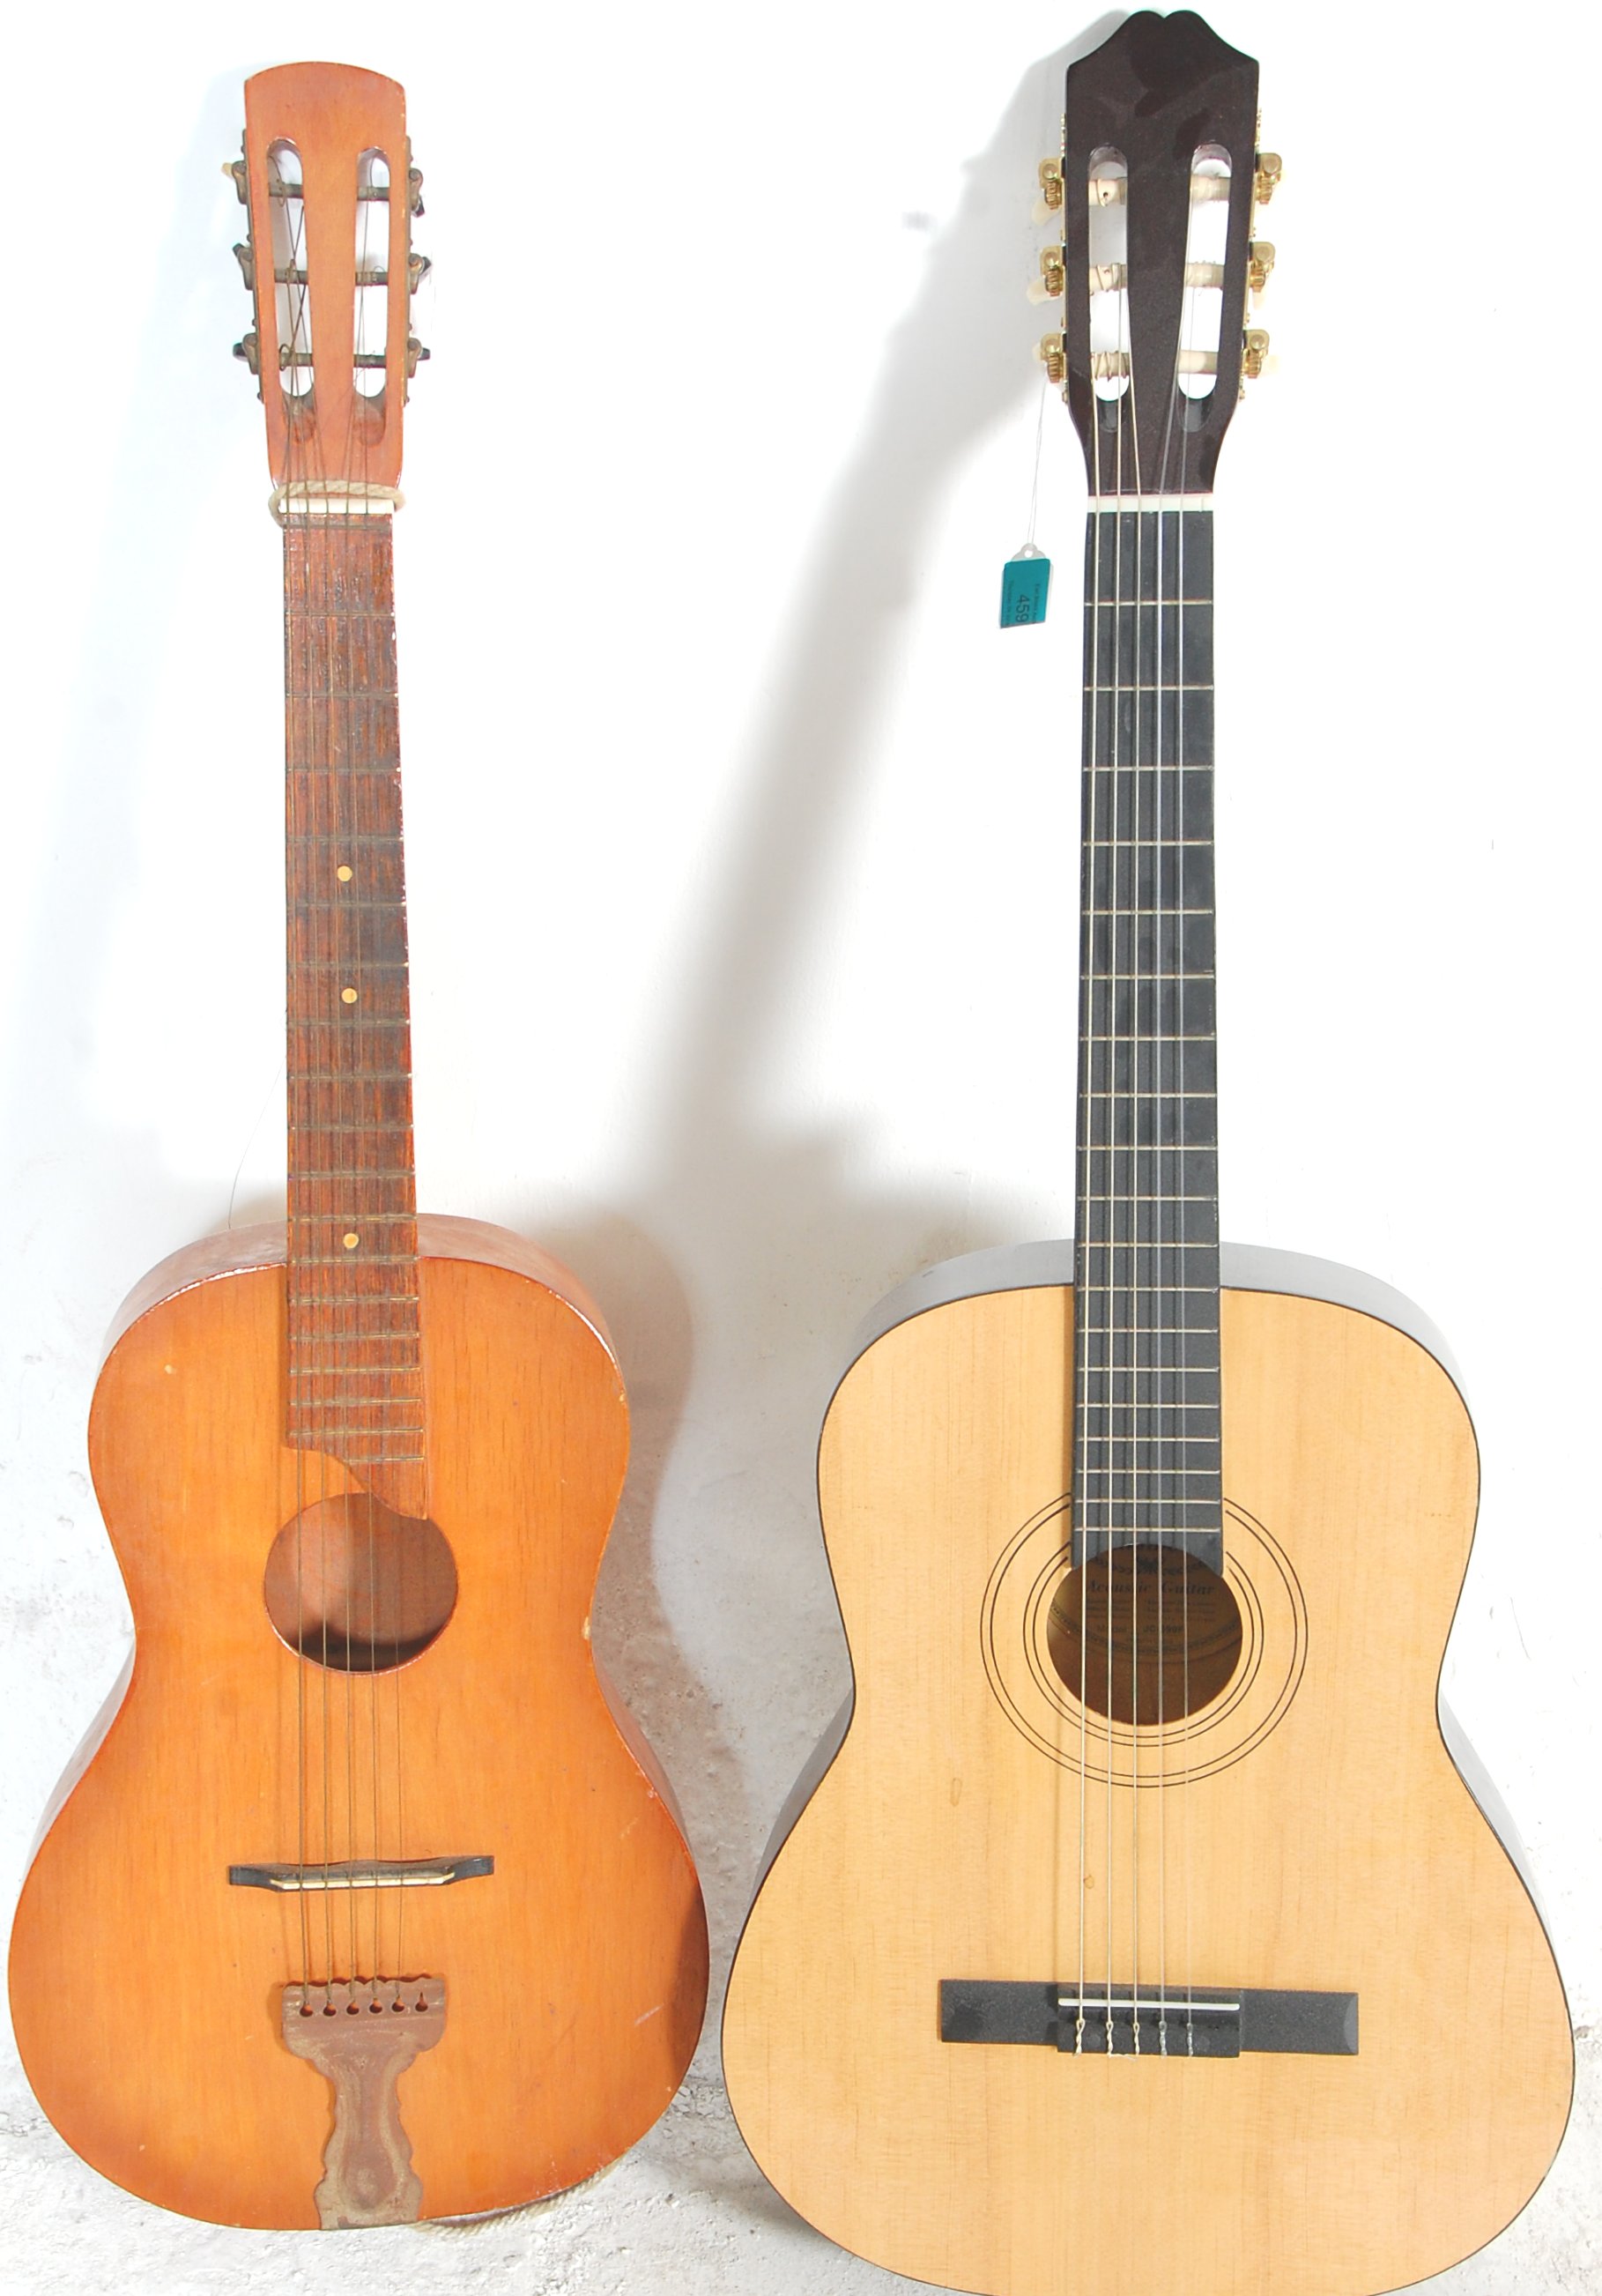 A Burswood made six string acoustic guitar having